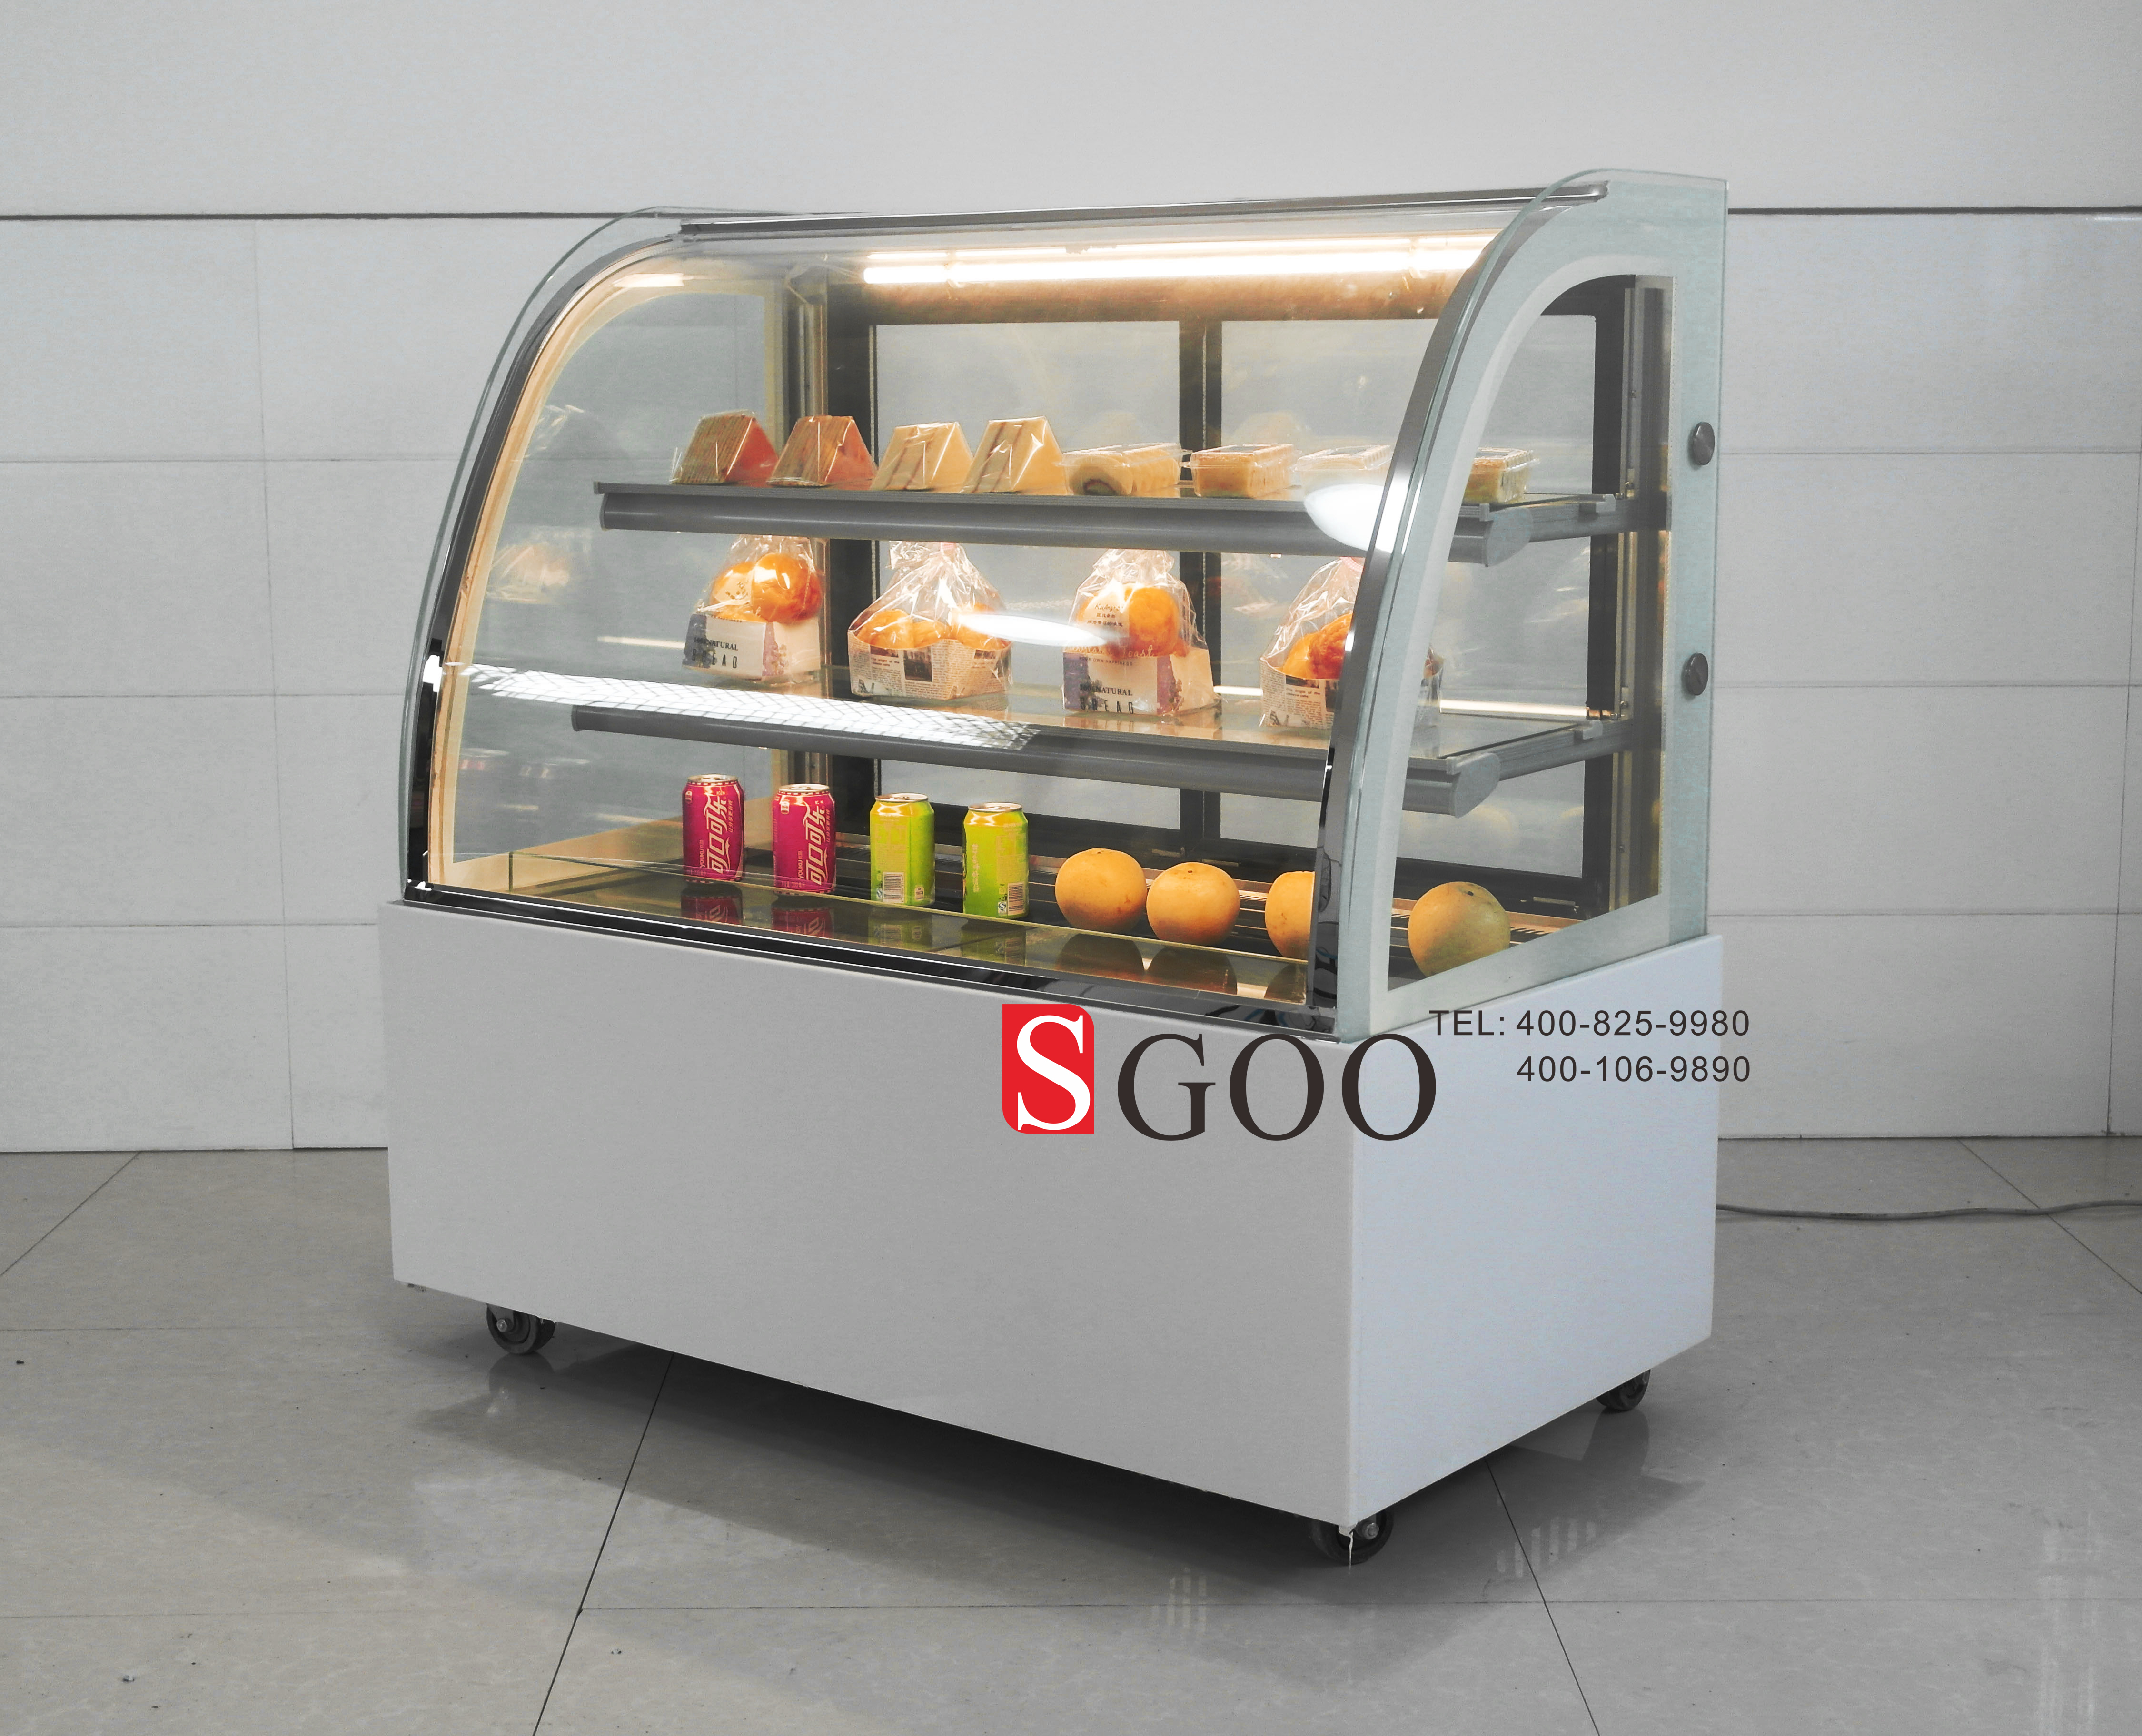 How does the price of stainless steel commercial refrigeration reflect the value for money 